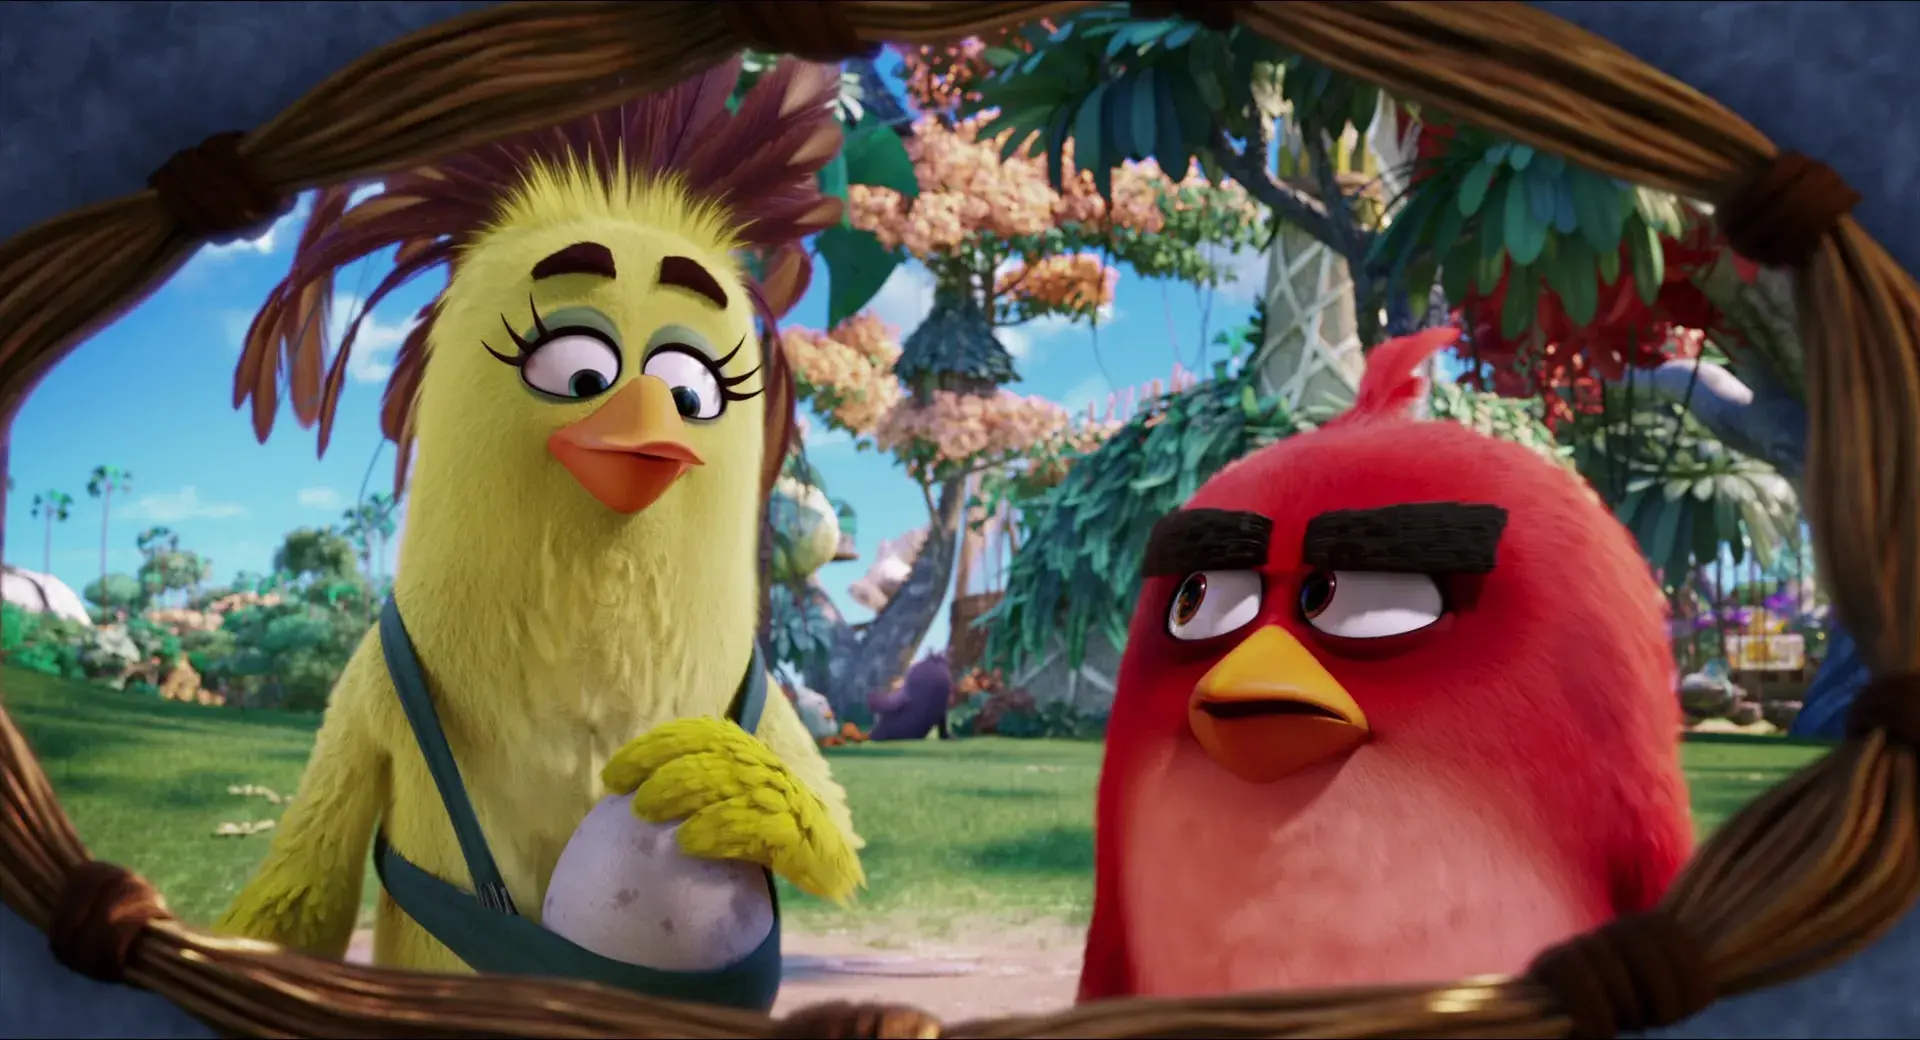 Jason Sudeikis and Jillian Bell in The Angry Birds Movie (2016)